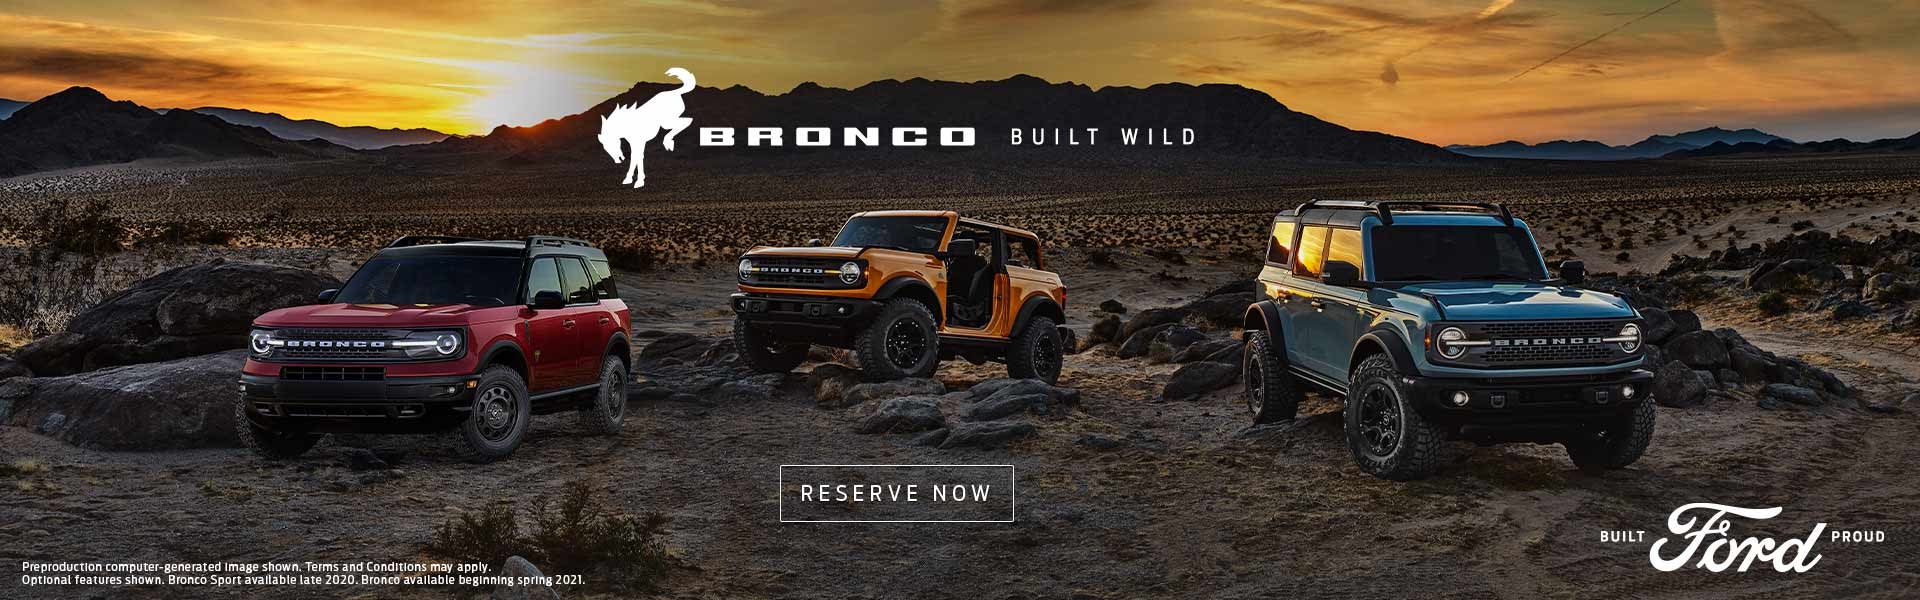 Reserve Your 2021 Bronco